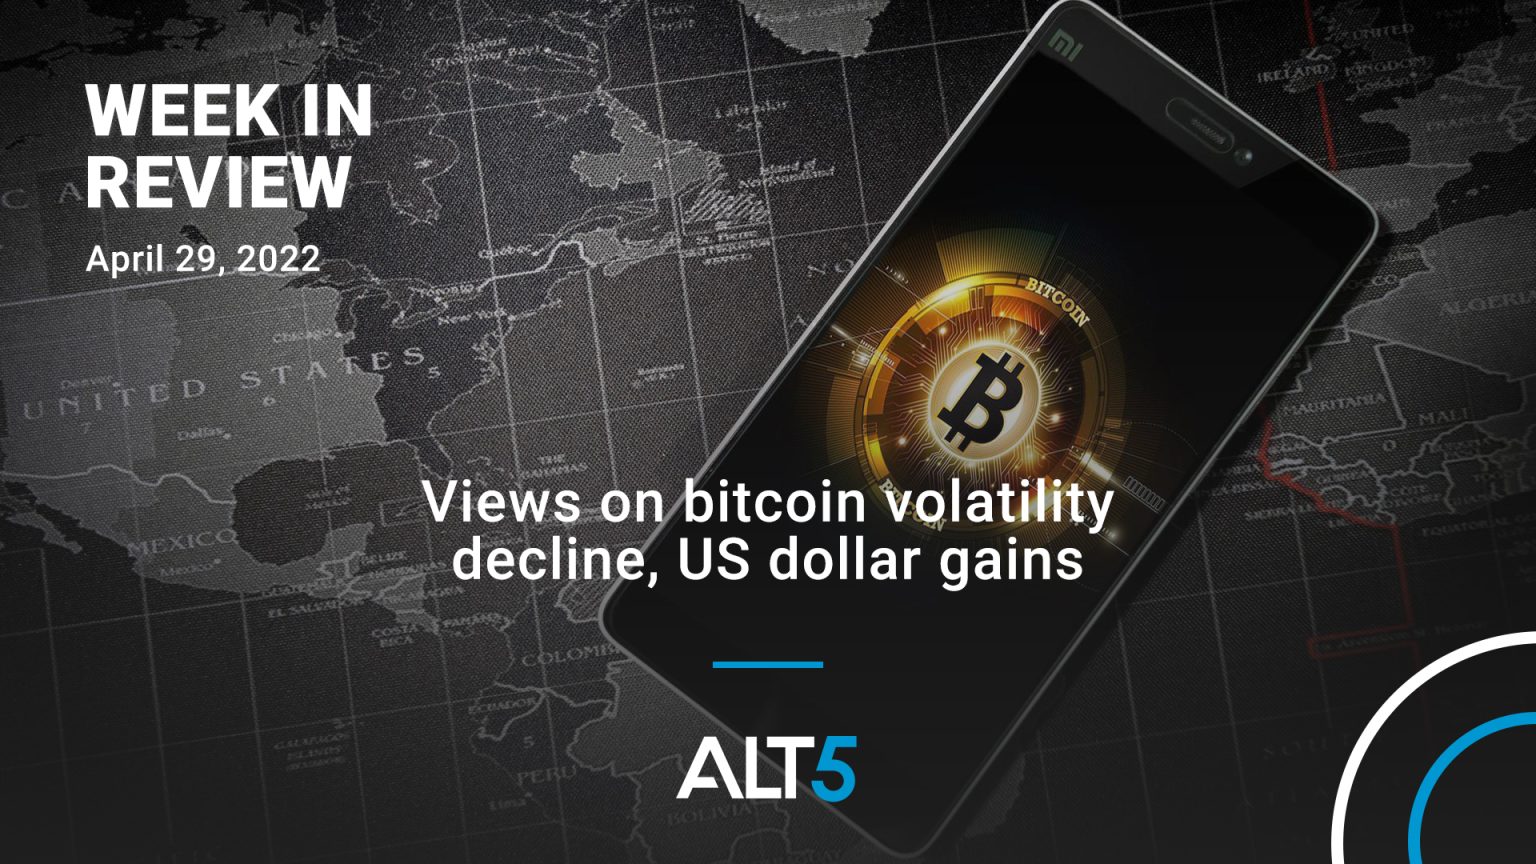 Week in review: April 29 2022 - Views on bitcoin volatility decline